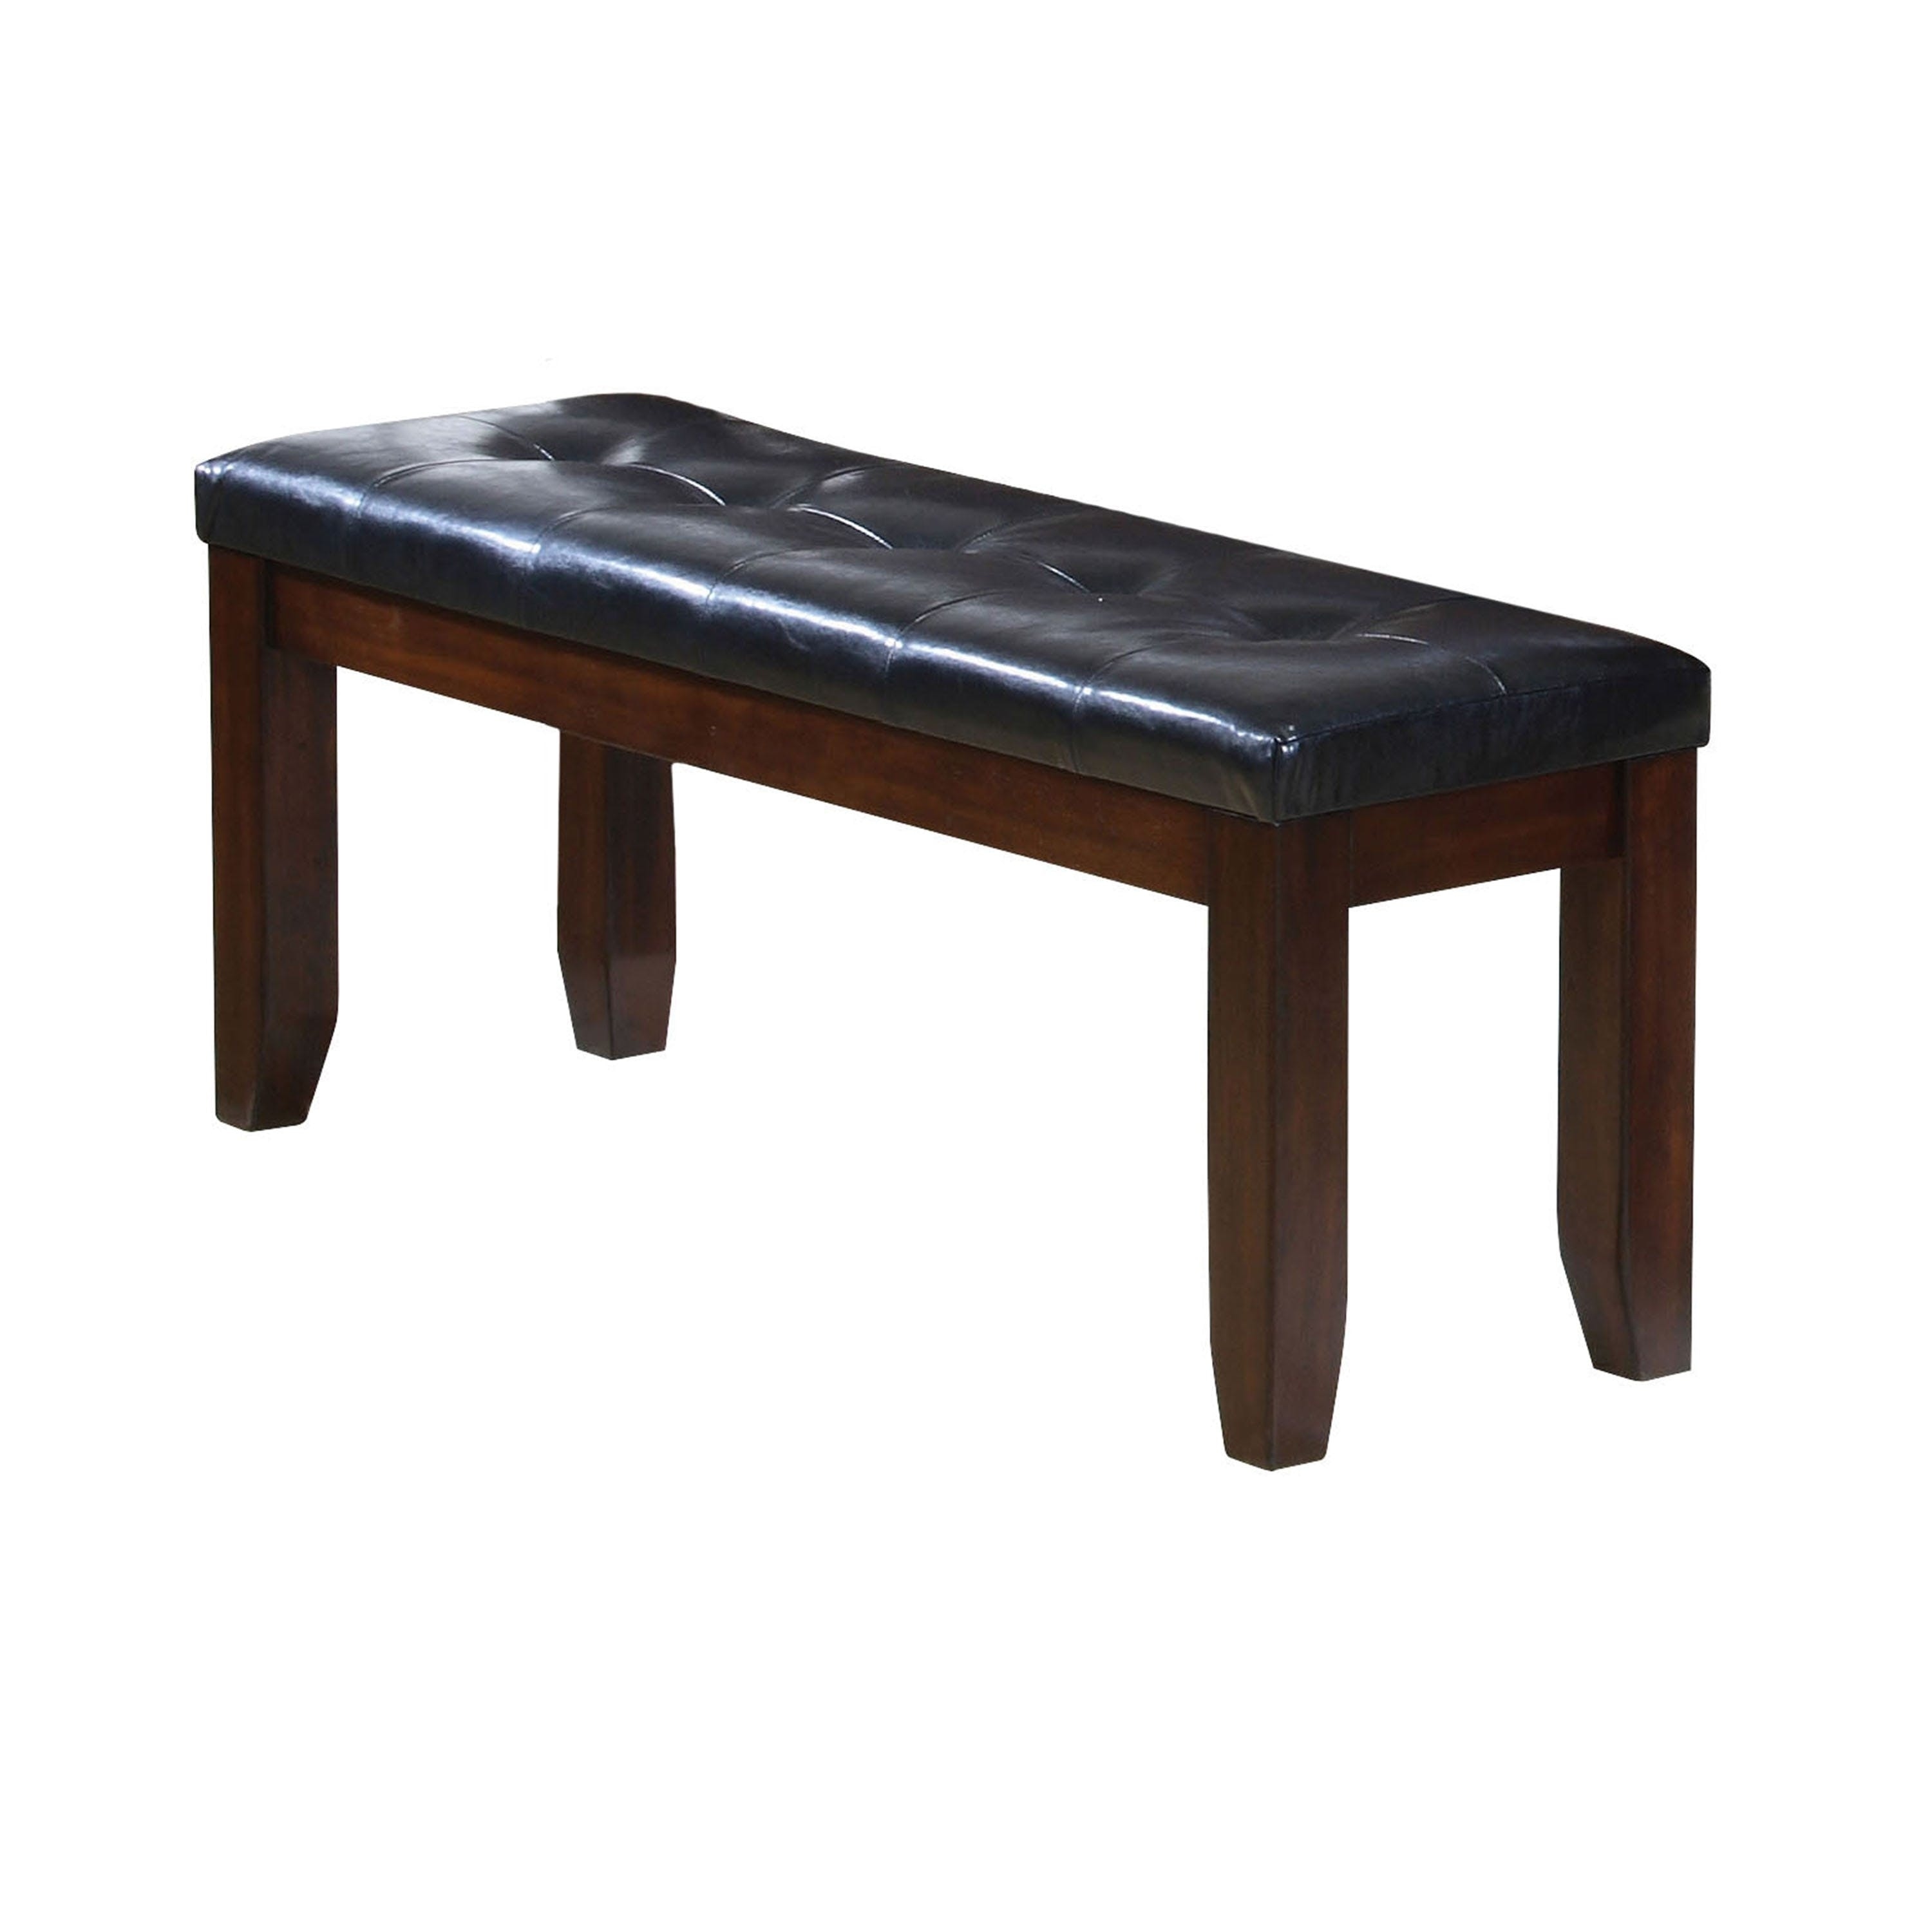 Leather Upholstered Wooden Bench With Tufted Seat, Espresso Brown & Black